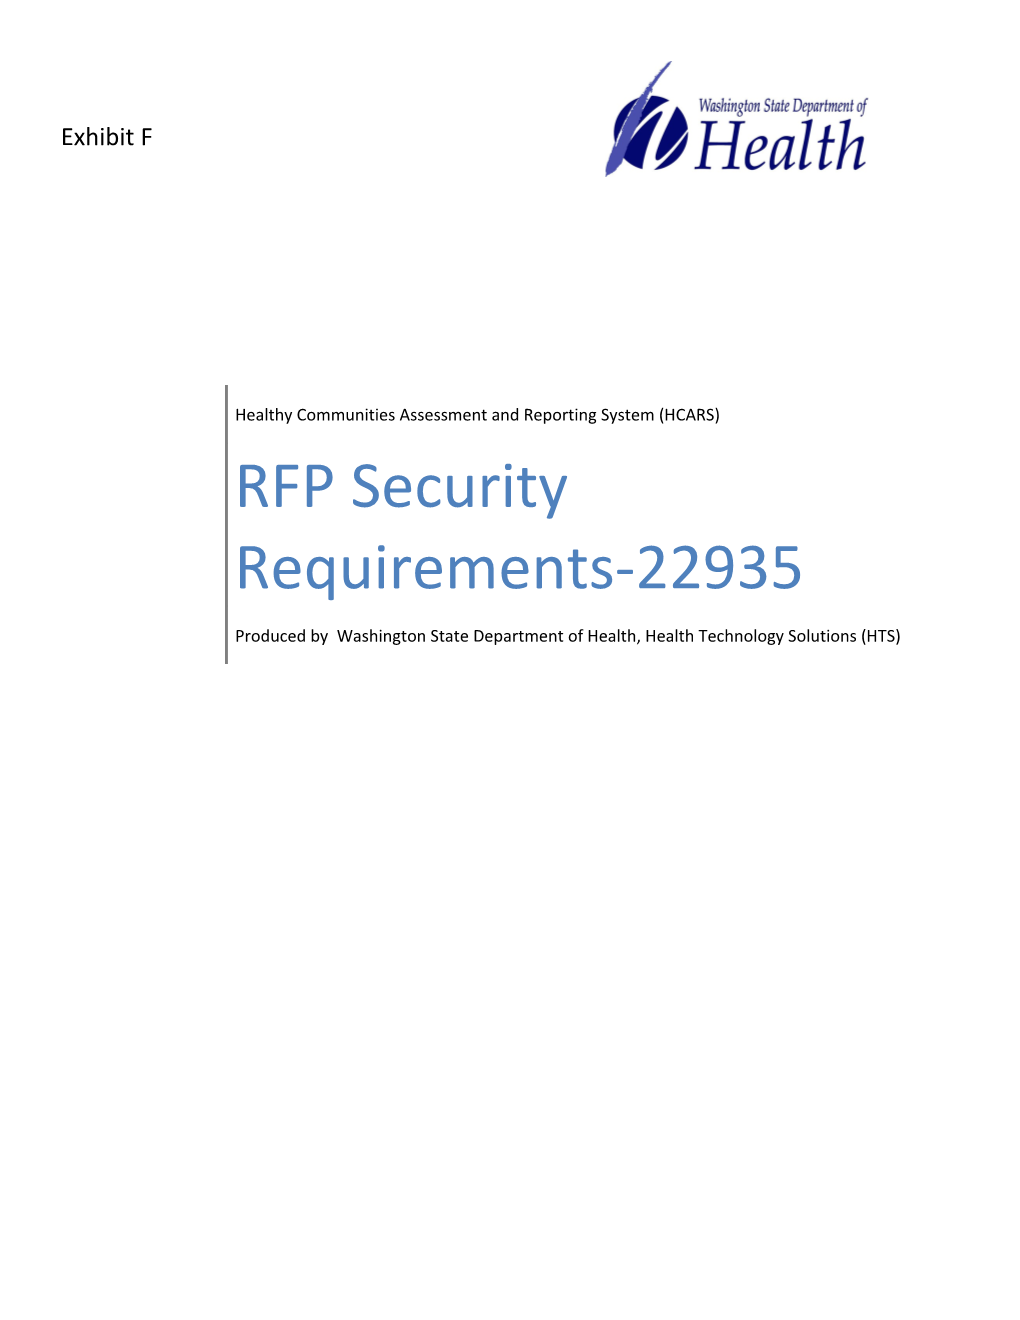 HCARS RFP Security Requirements